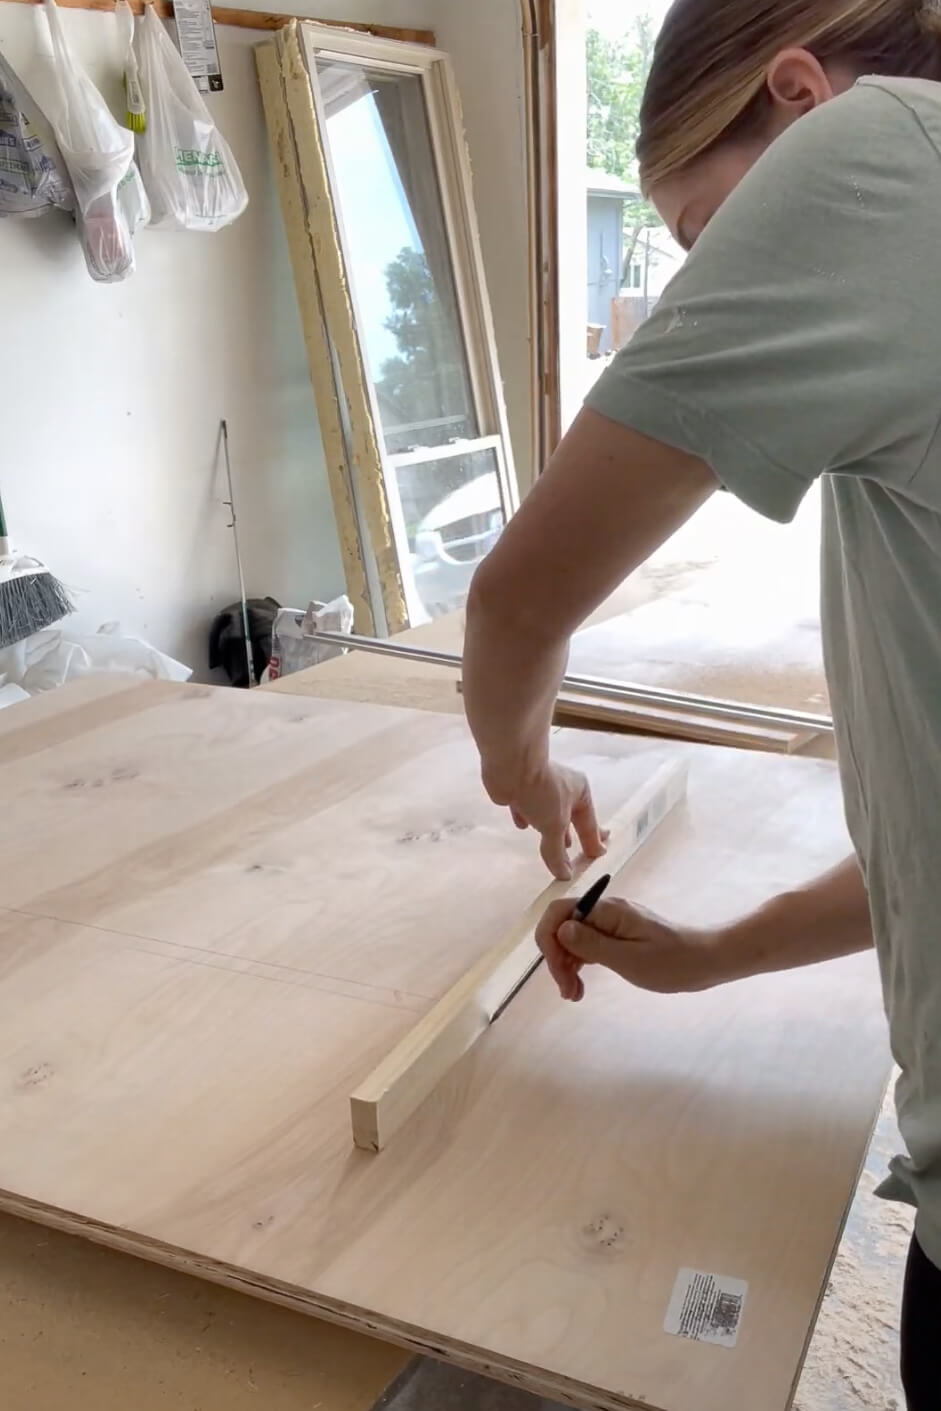 Woman measuring for cut lines while building kitchen cabinets.